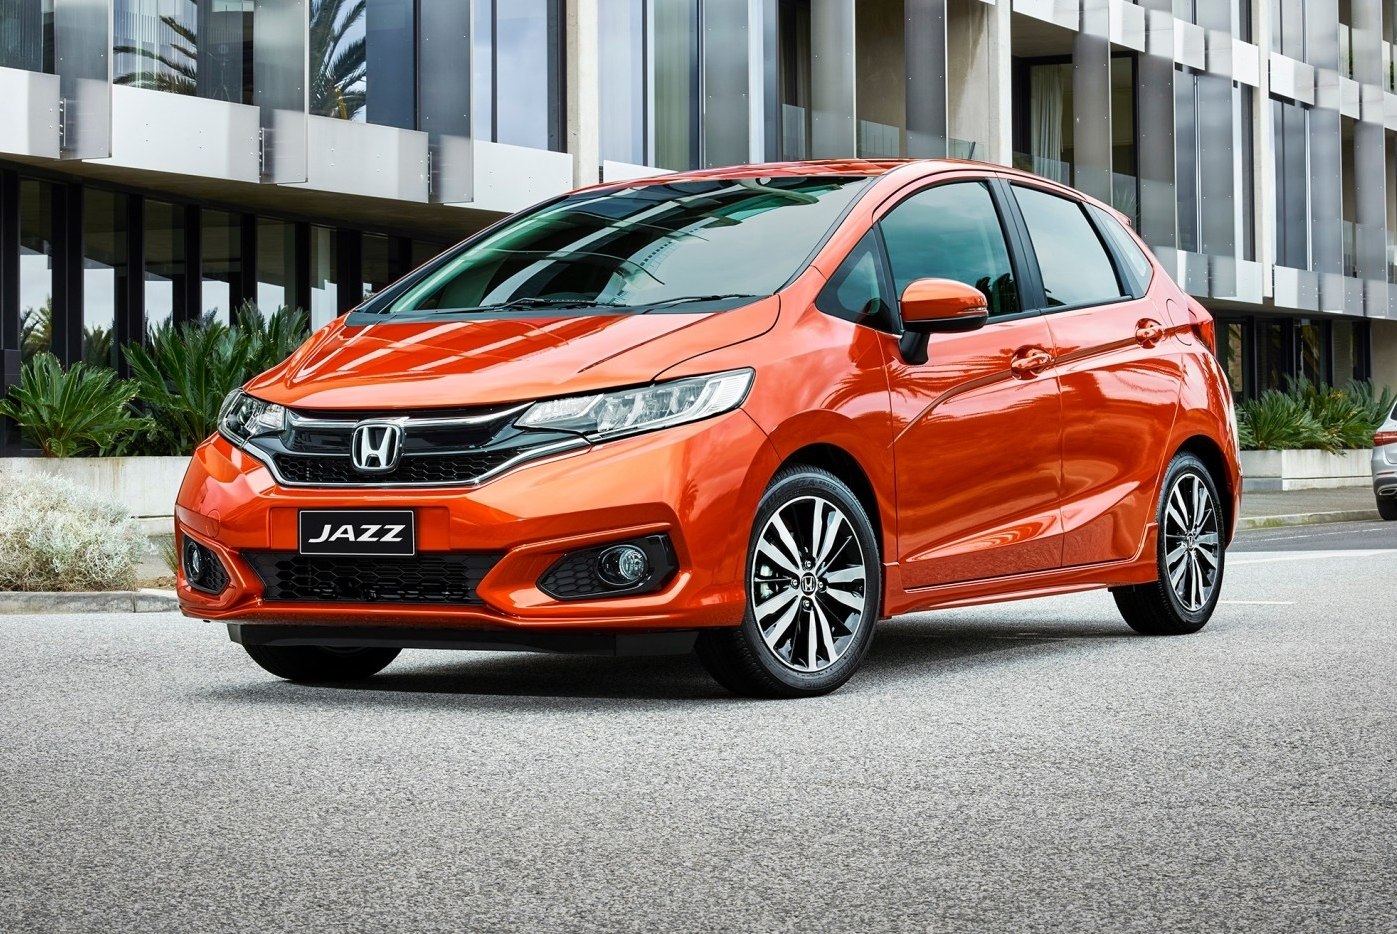 Compare Honda Jazz and Toyota Auris. Which is Better?